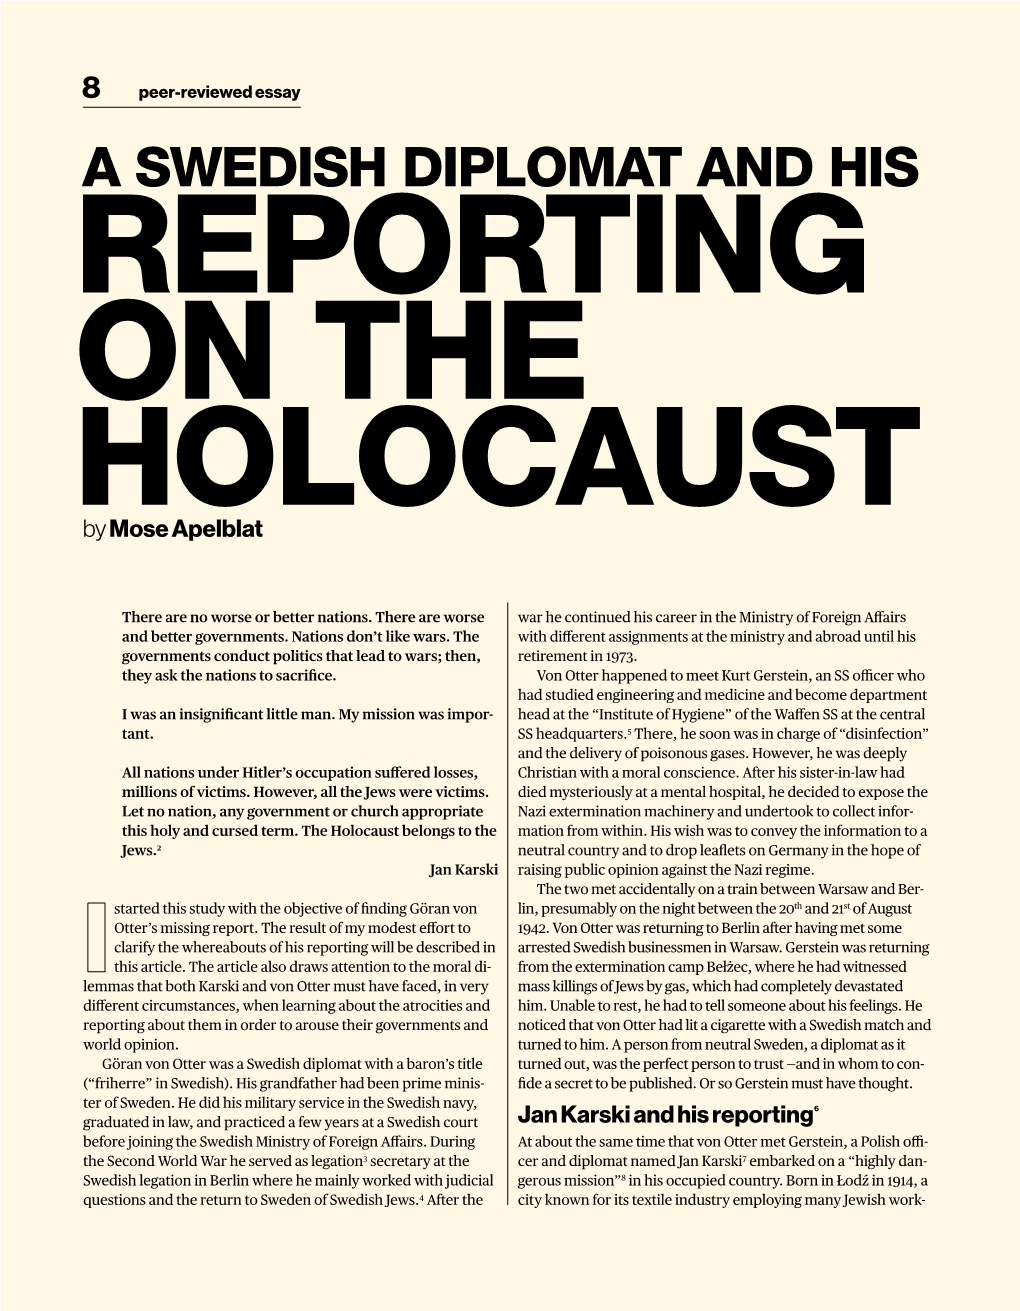 A Swedish Diplomat and His Reporting on the Holocaust by Mose Apelblat